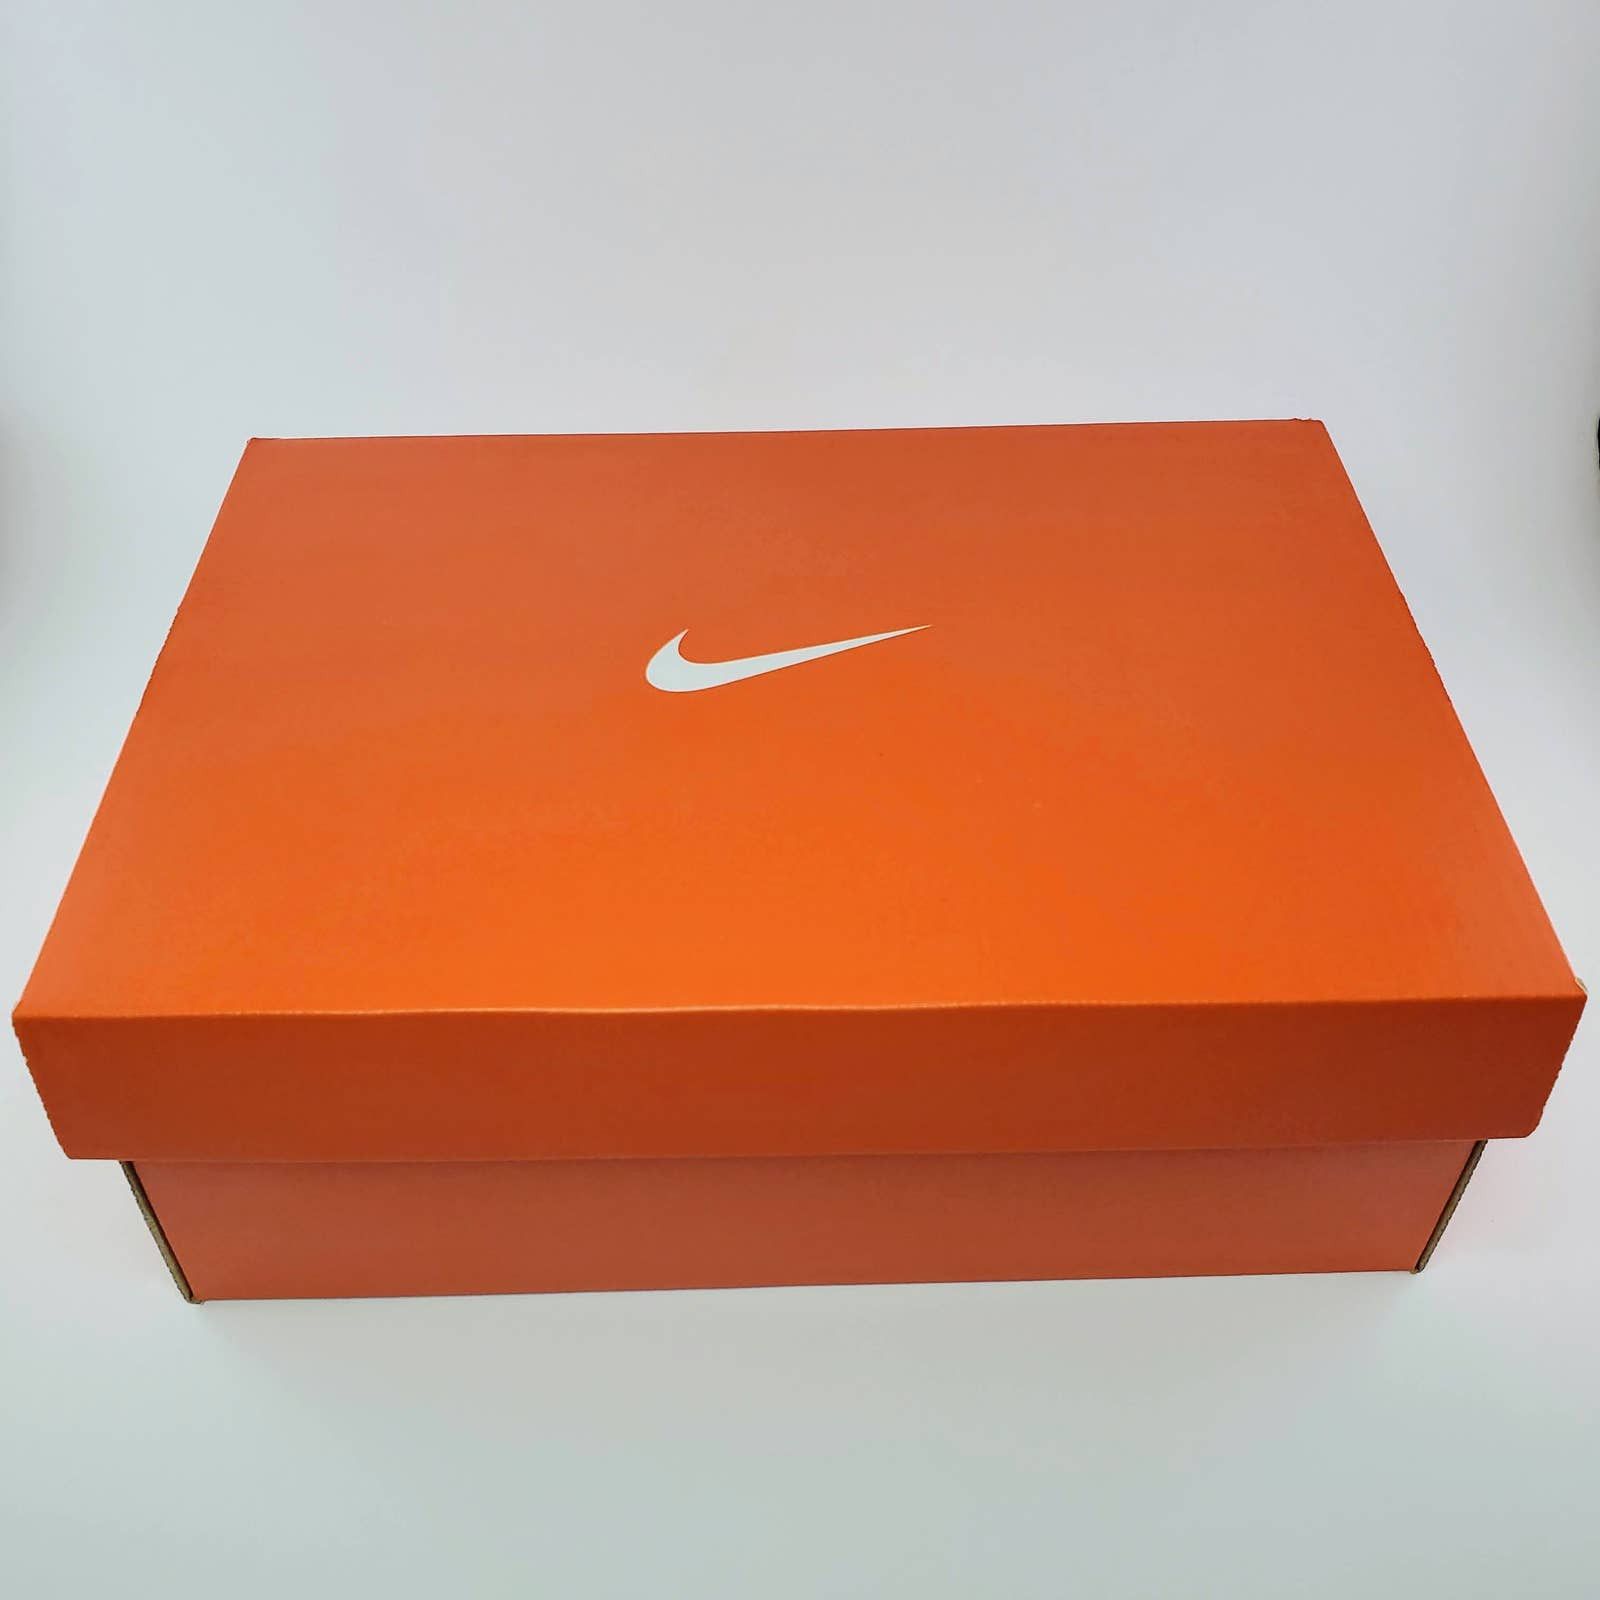 Nike NIKE Zoom Rival SD 4 Shoes Green Sizes 6.5, 7.5, 9.5, 12.5 Size US 9.5 / EU 42-43 - 5 Preview